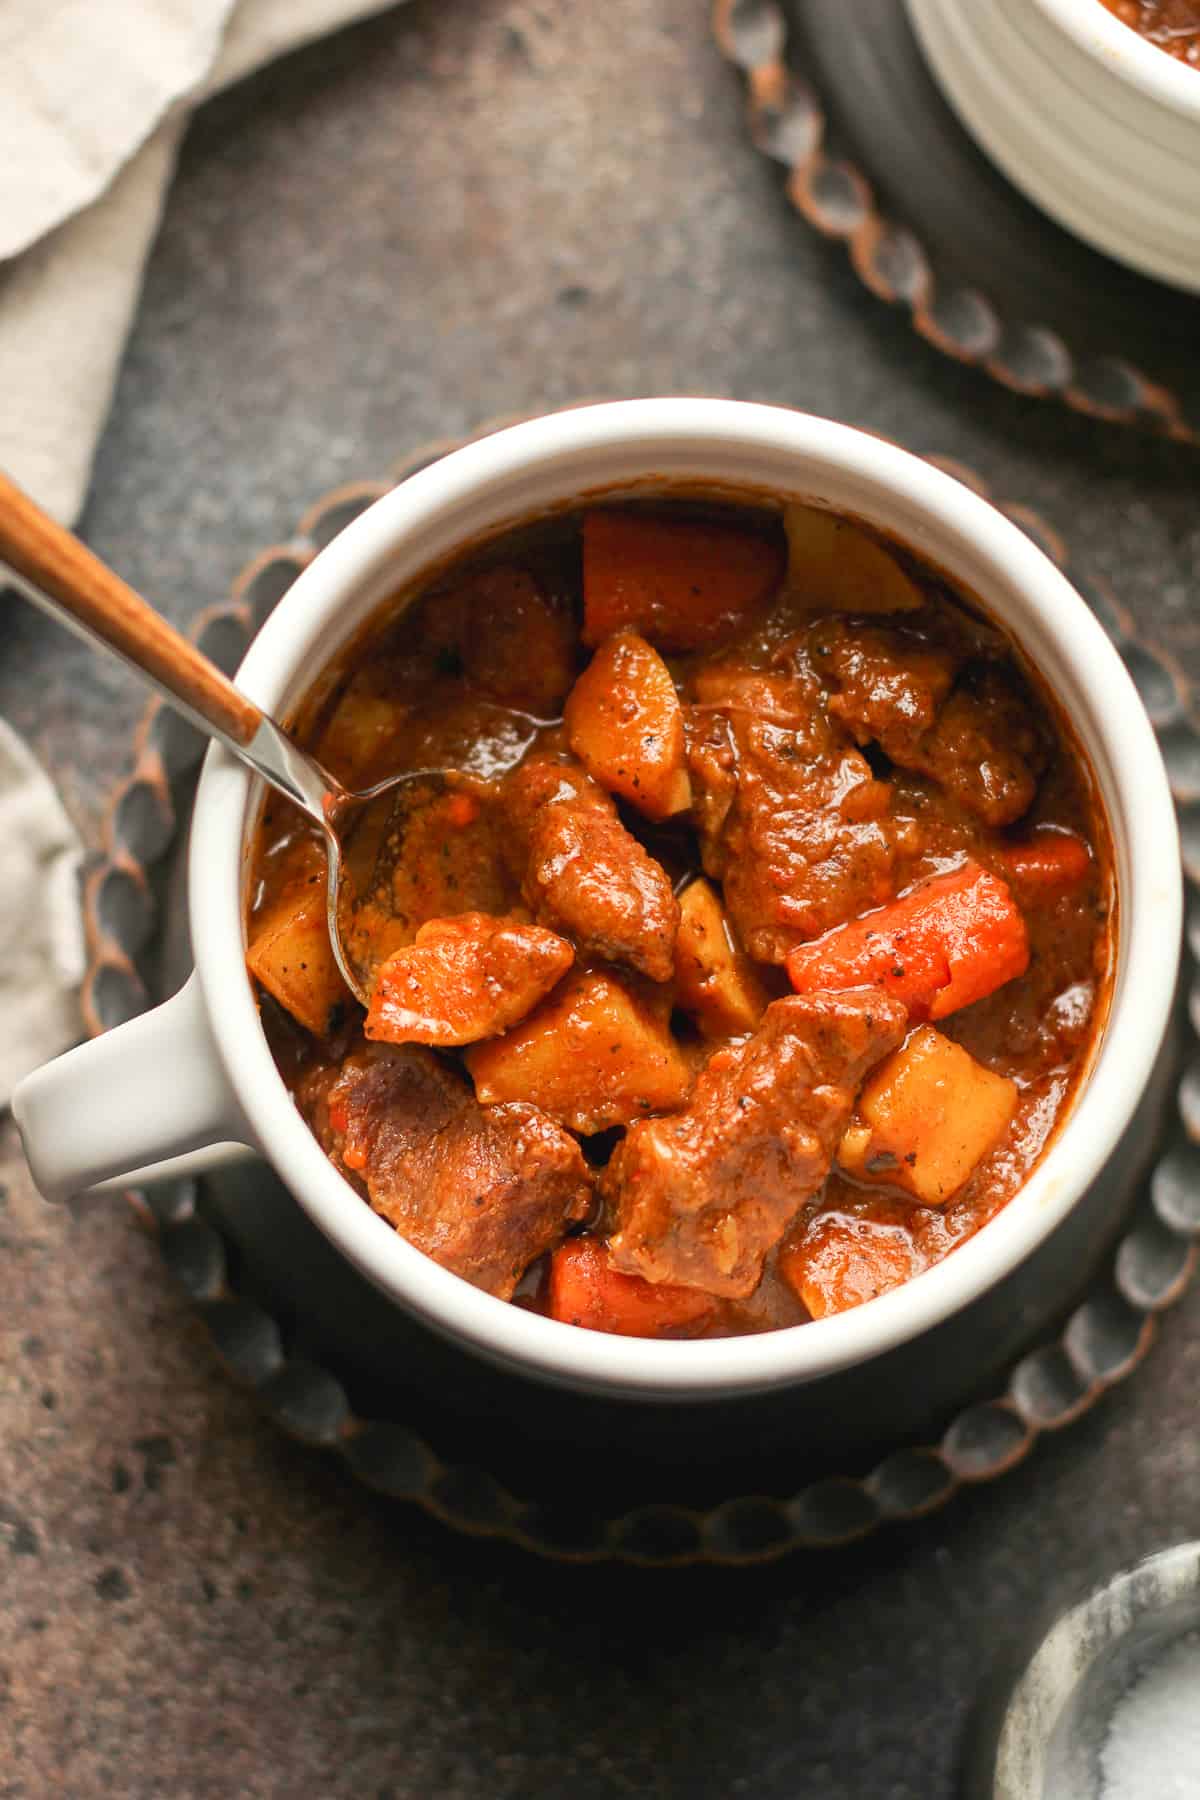 A mug of curry beef stew with carrots and potatoes.